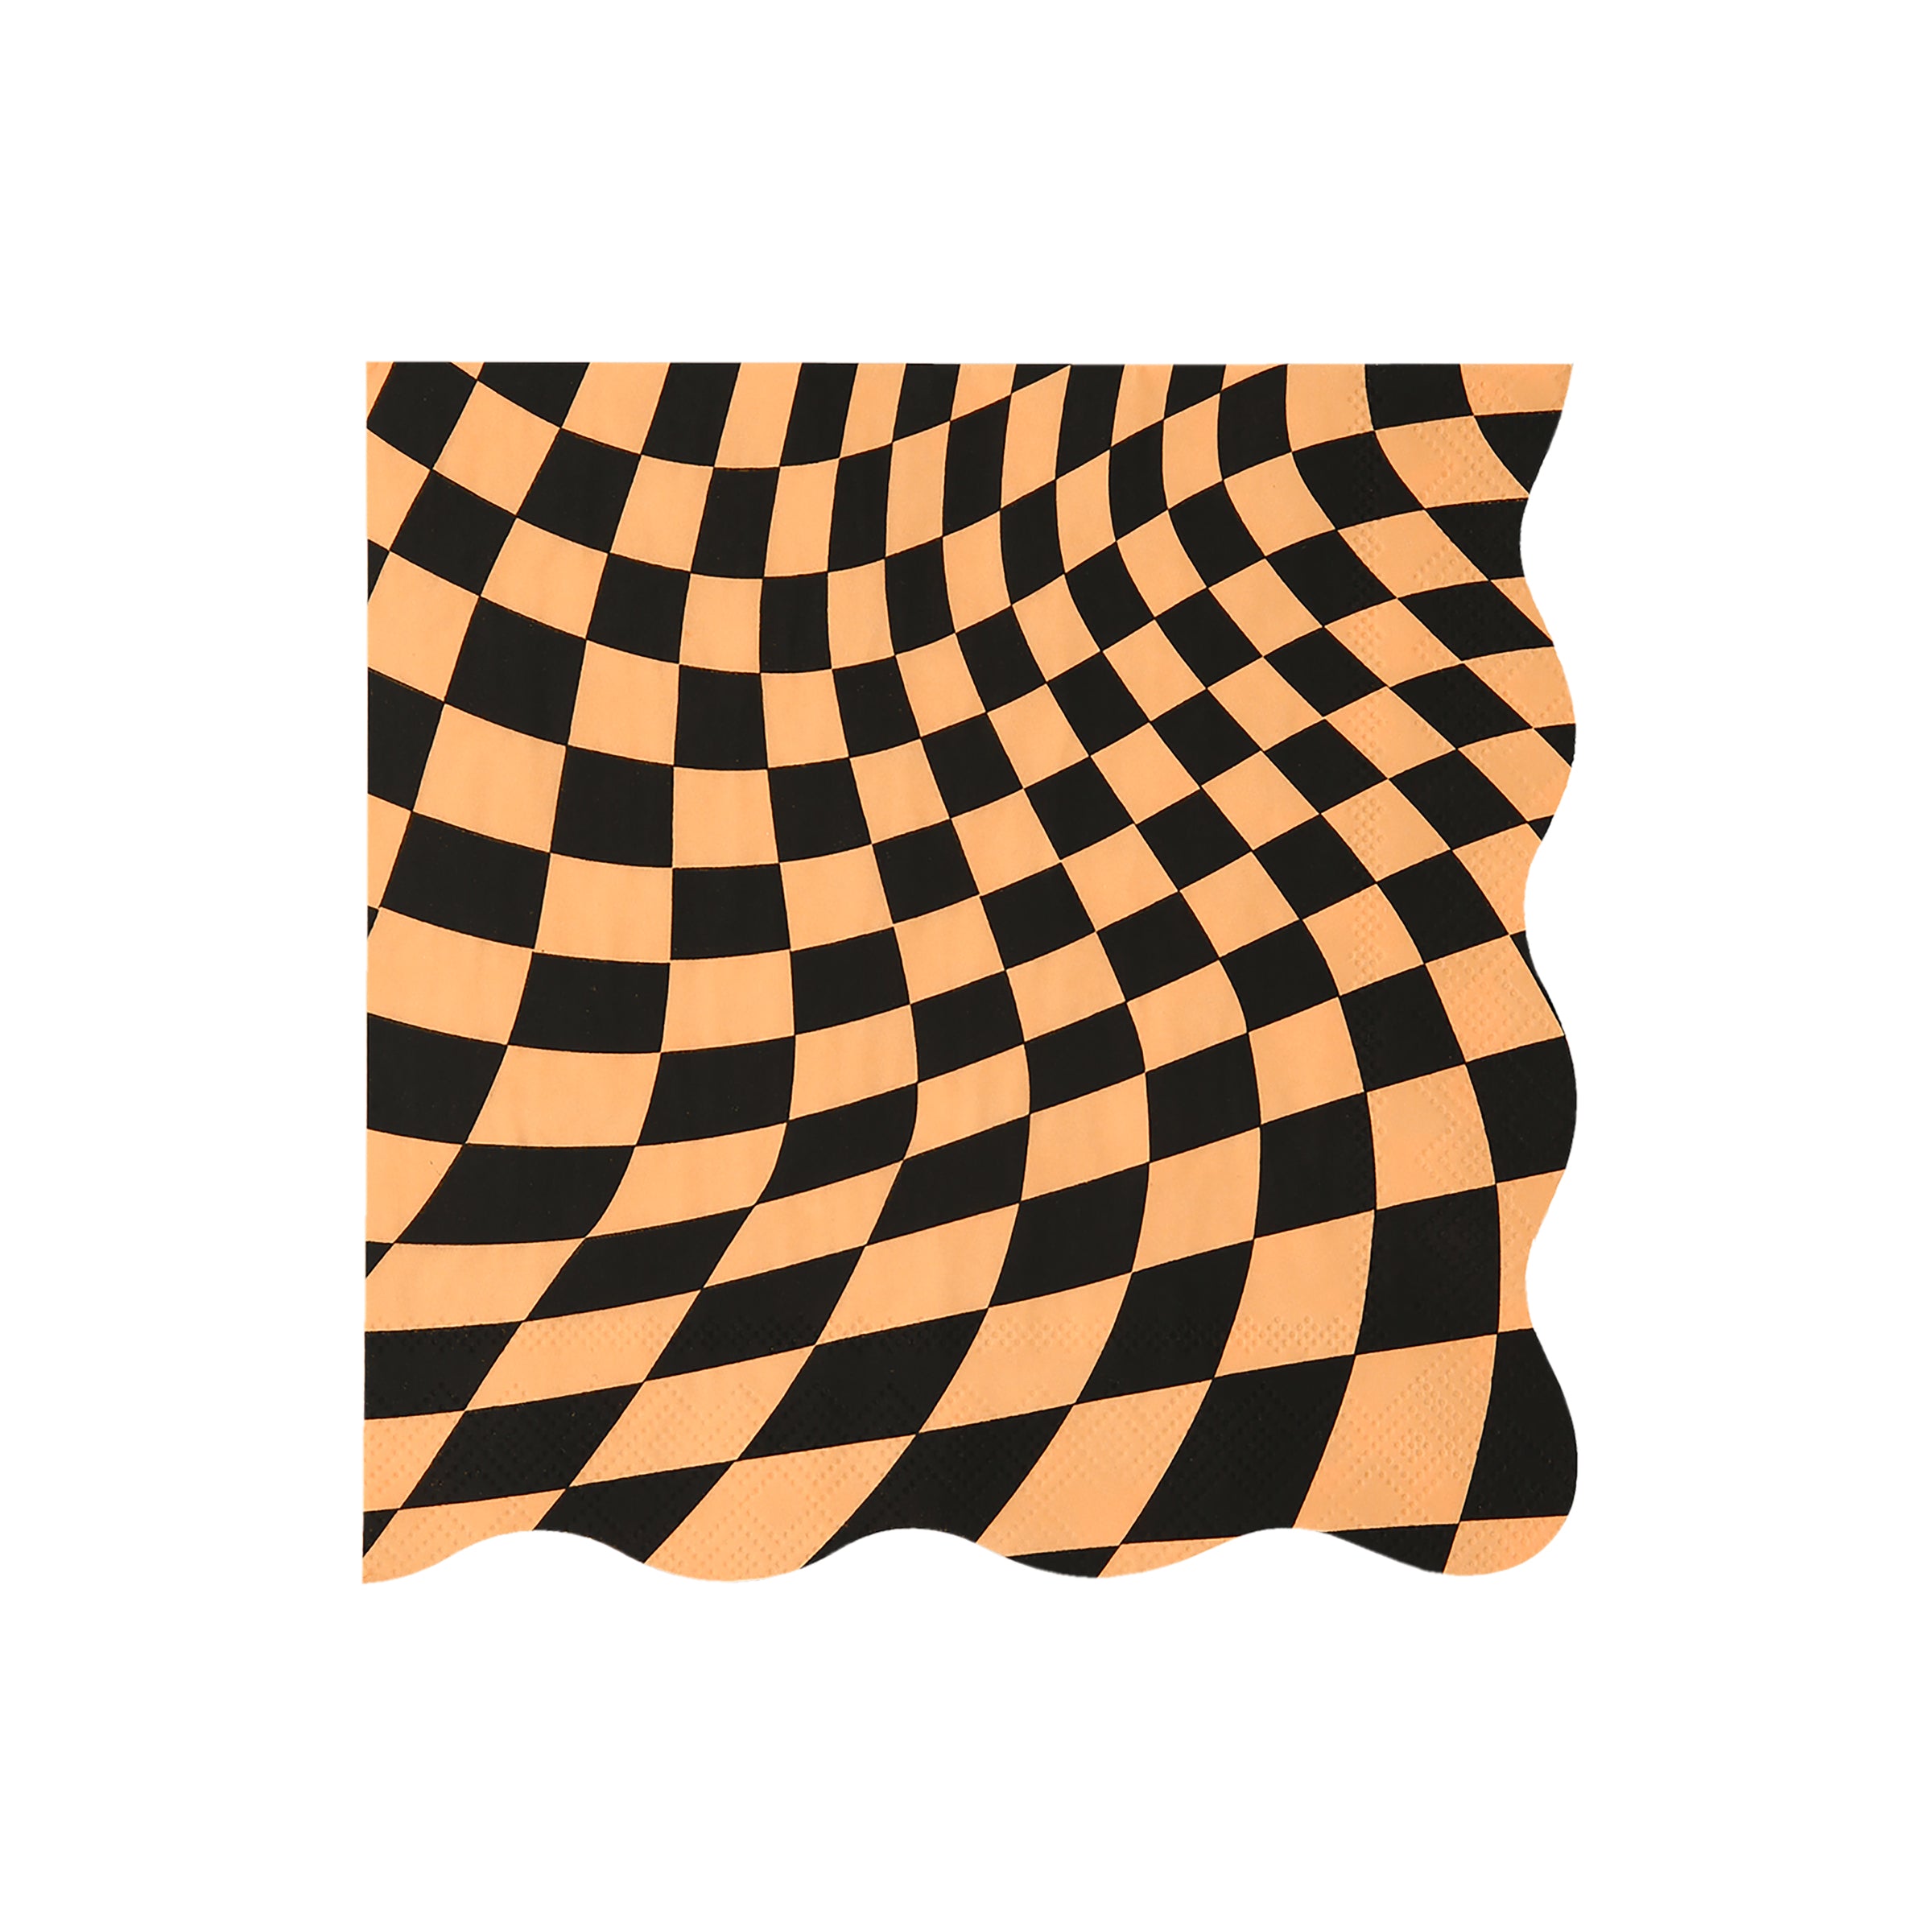 Our party napkins have a swirling black checkered pattern perfect go add to your Halloween party ideas.